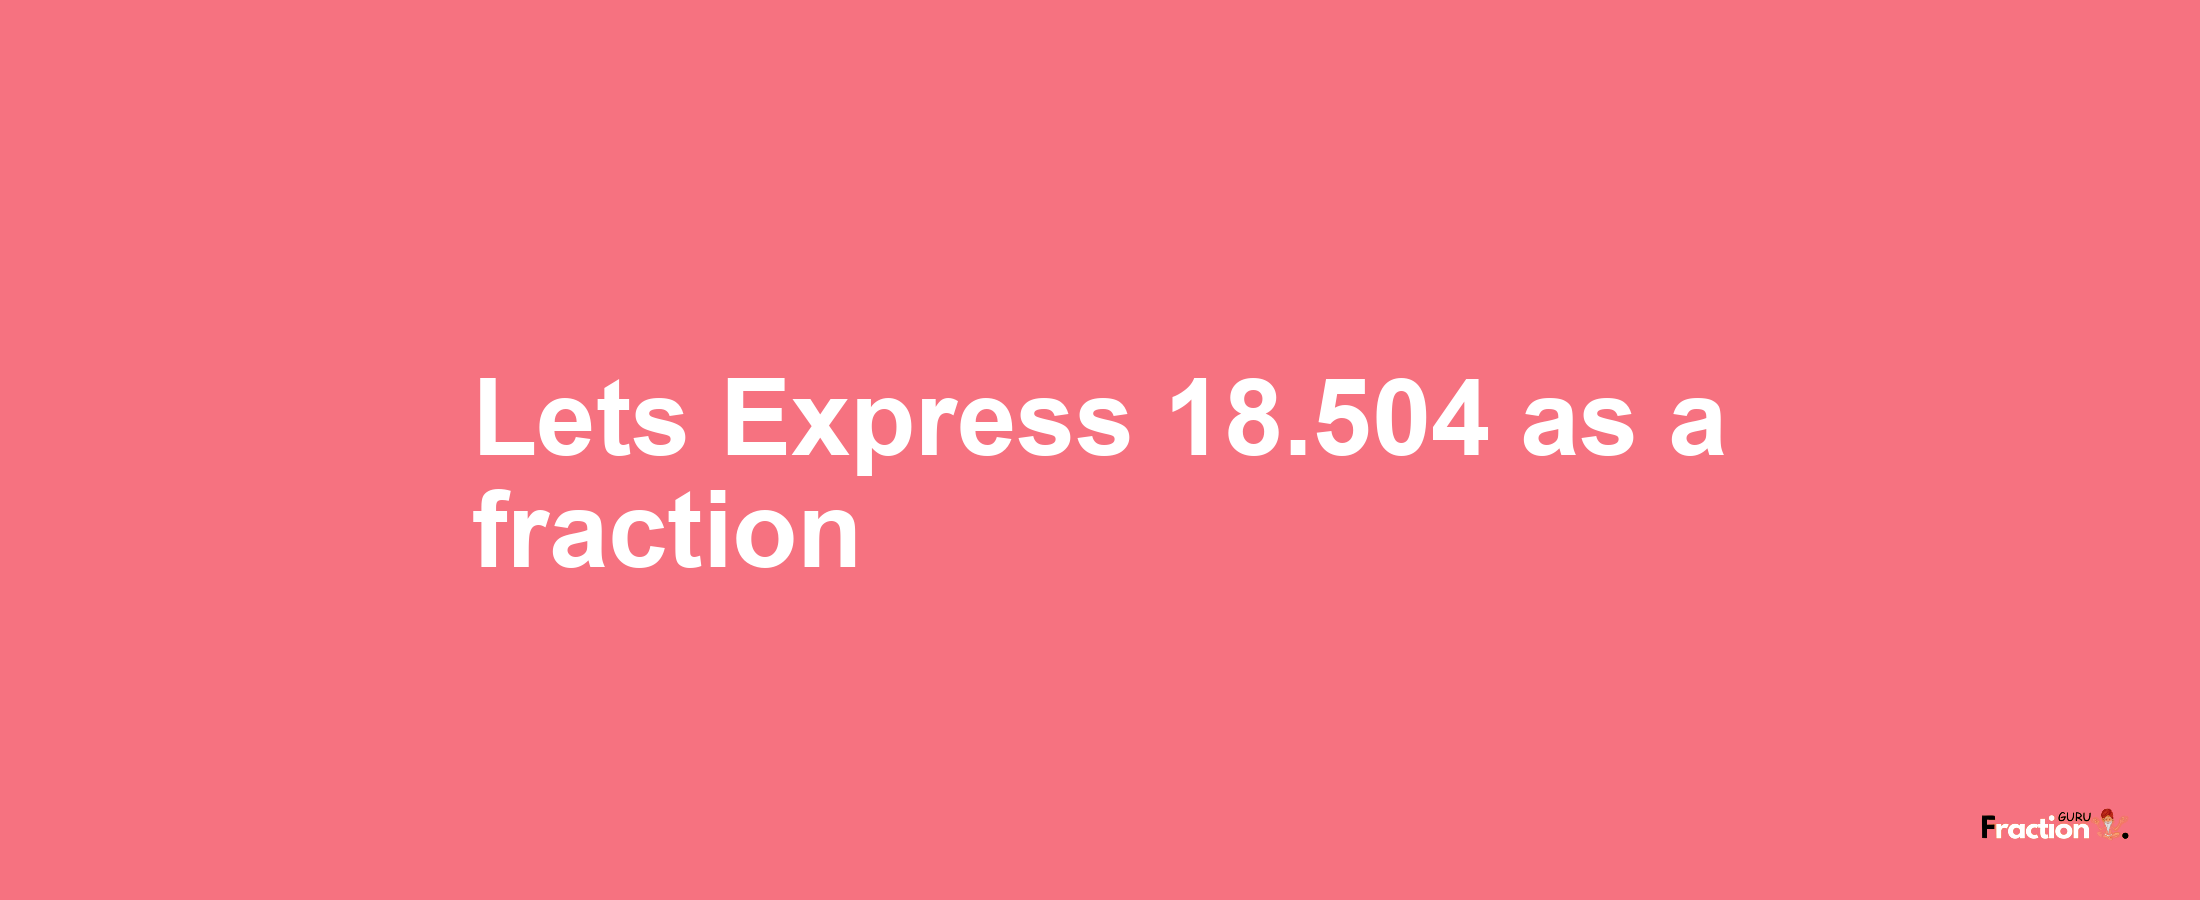 Lets Express 18.504 as afraction